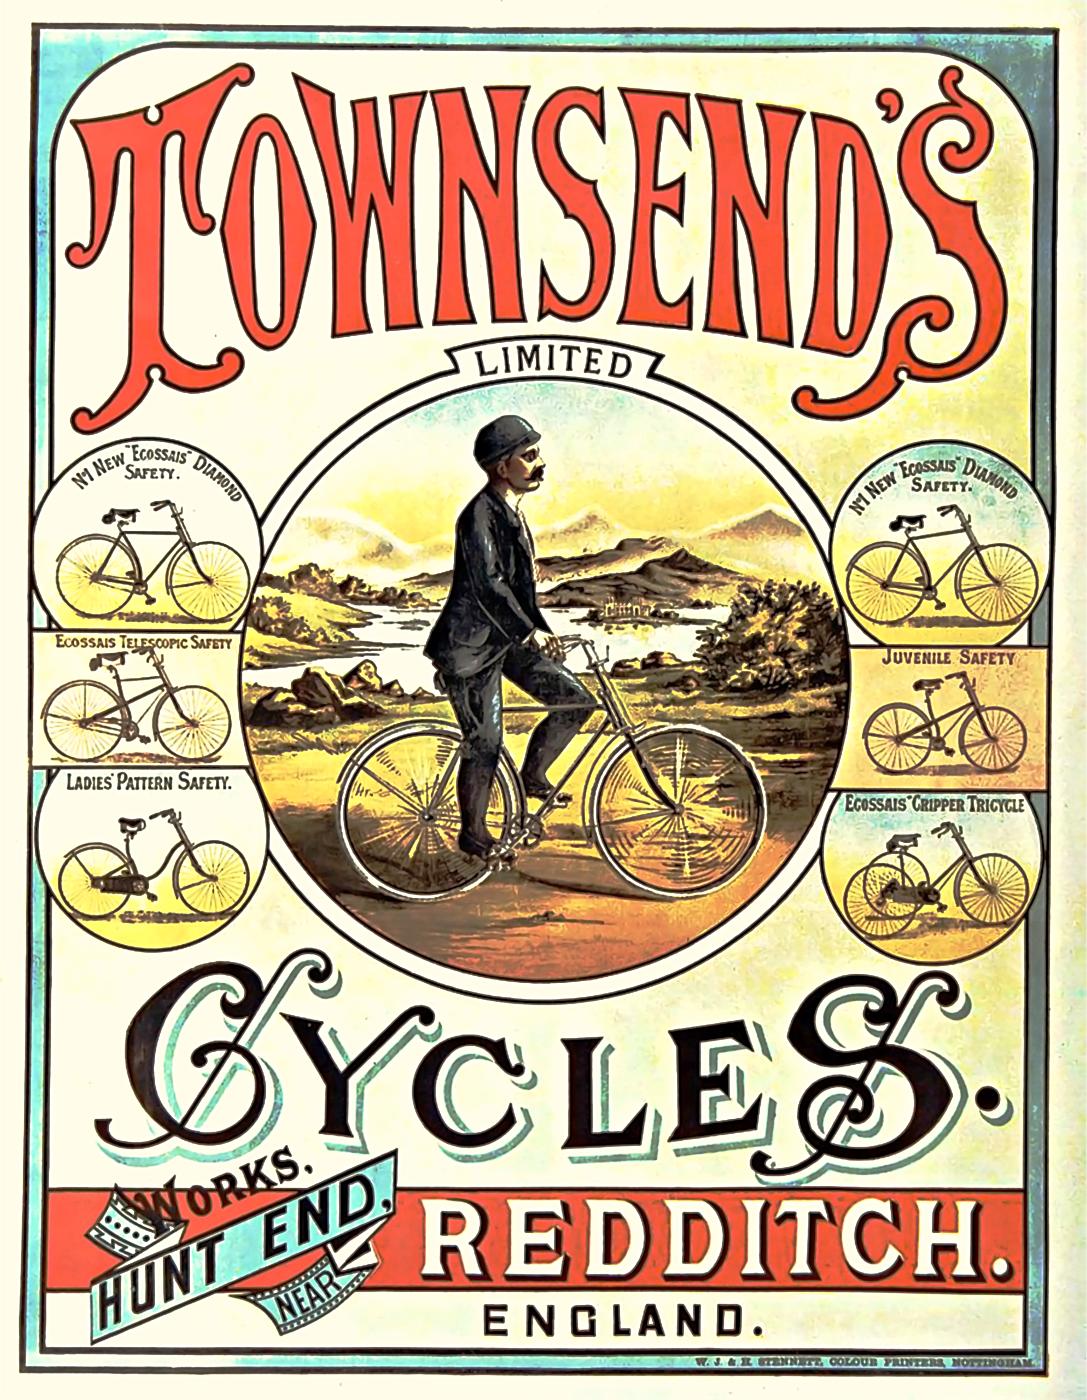 Townsend's Cycles